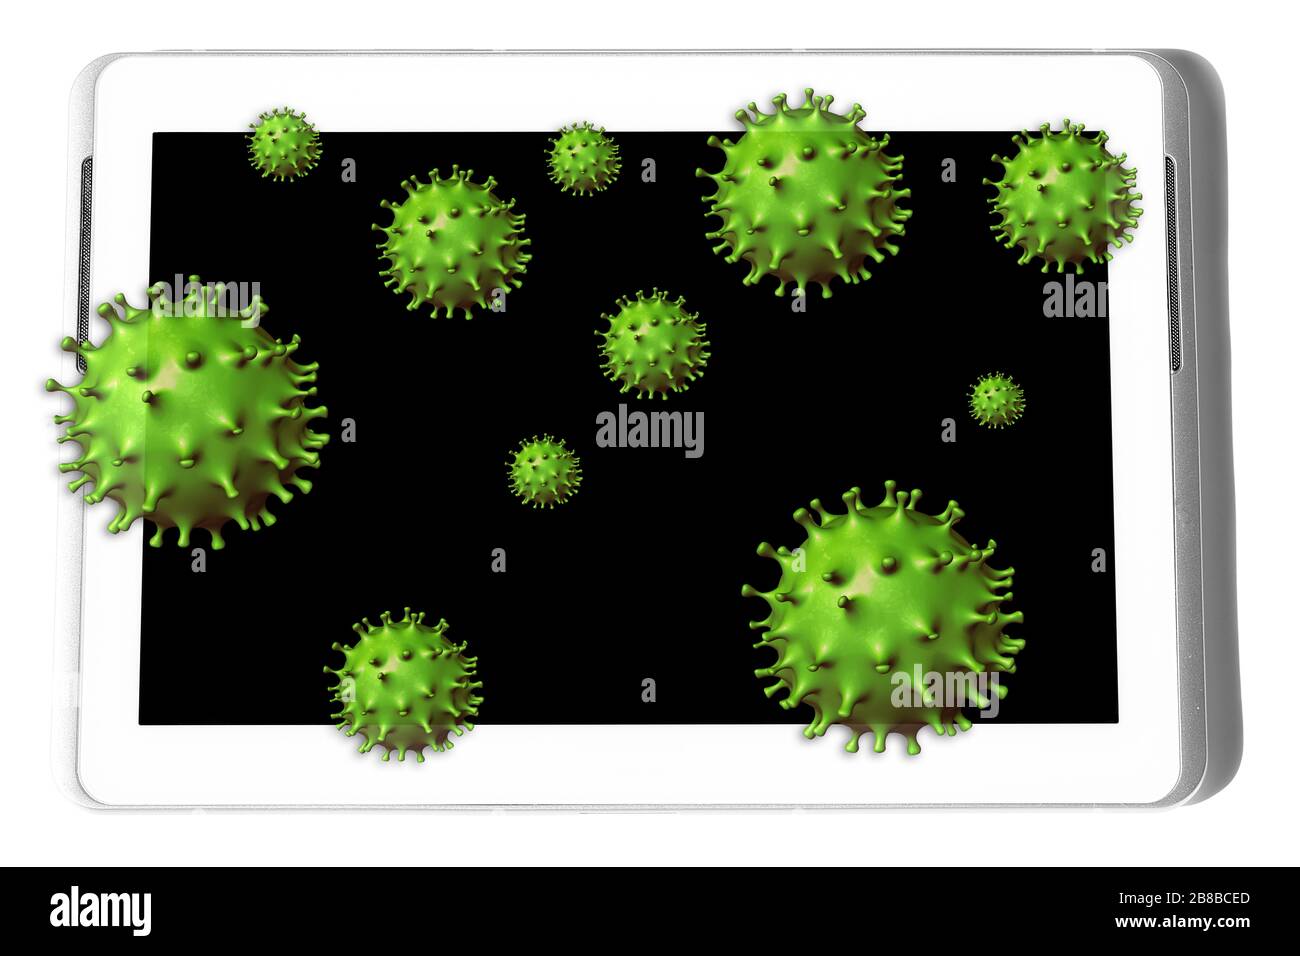 Coronavirus or Covid-19 settles on surfaces of objects we touch such as tablets. Smart working concept during quarantine of 2019-nCoV or Covid 19-NCP. Stock Photo